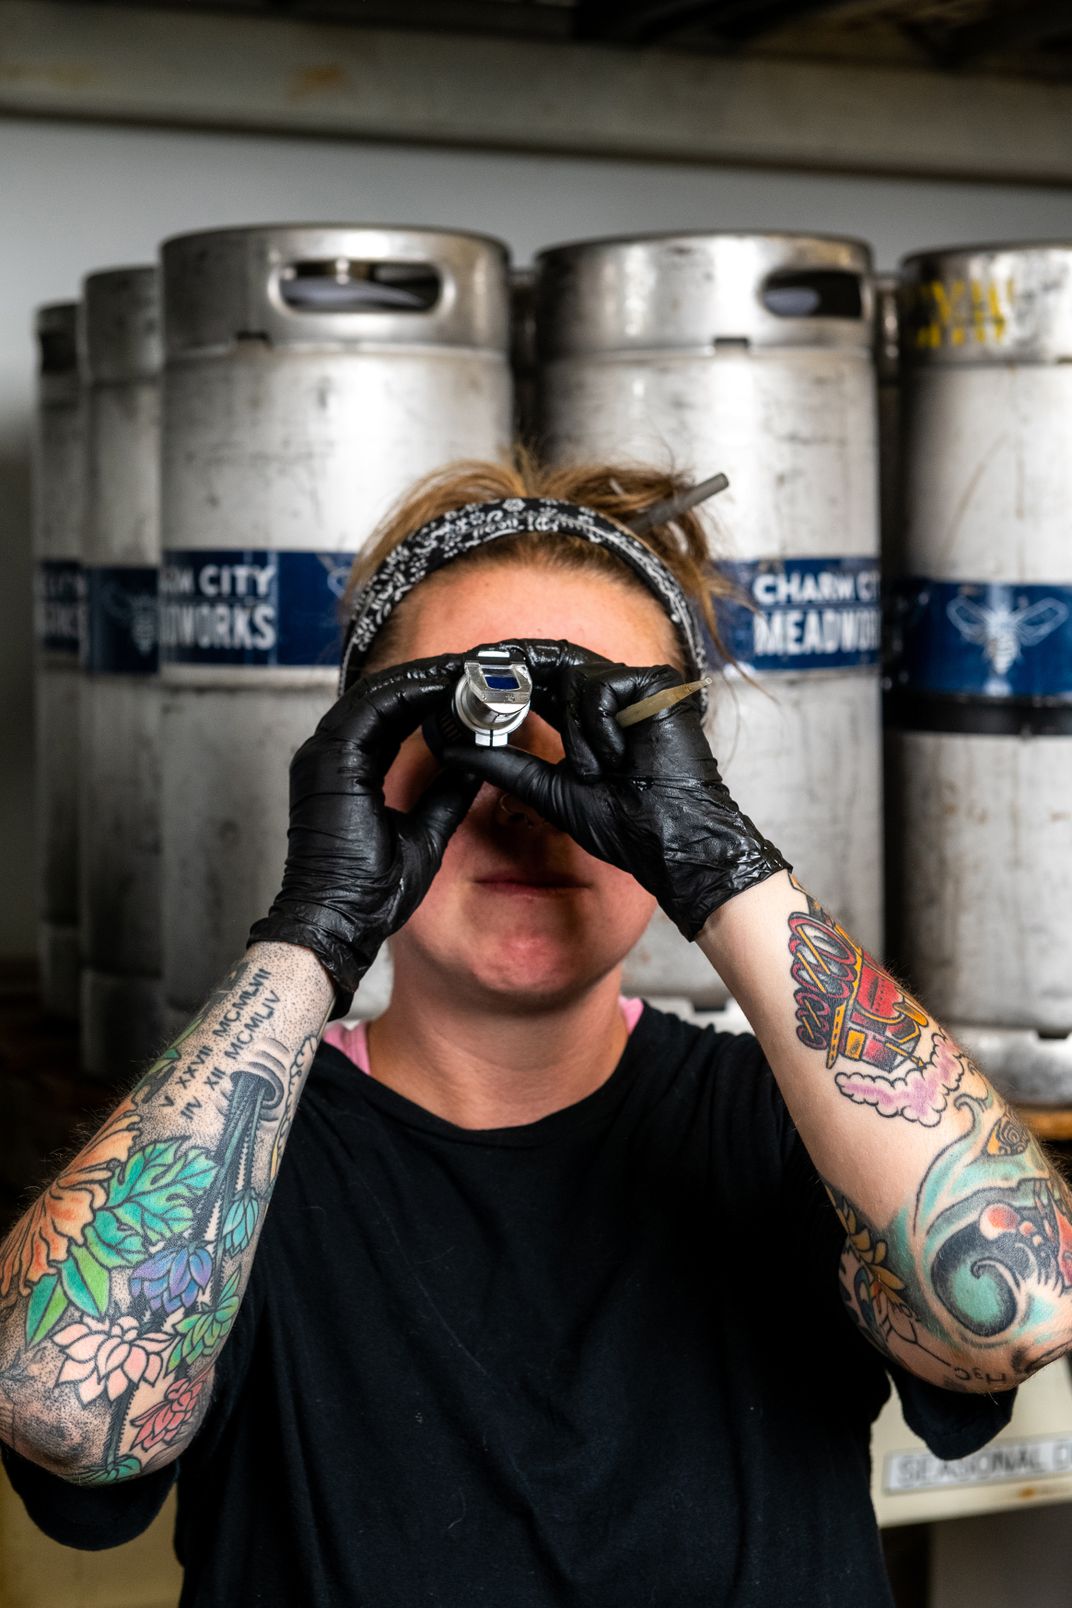 Pronobis looks through a refractometer to measure the sugar content in the must, a mixture of water and honey—two of the basic ingredients of all types of mead.